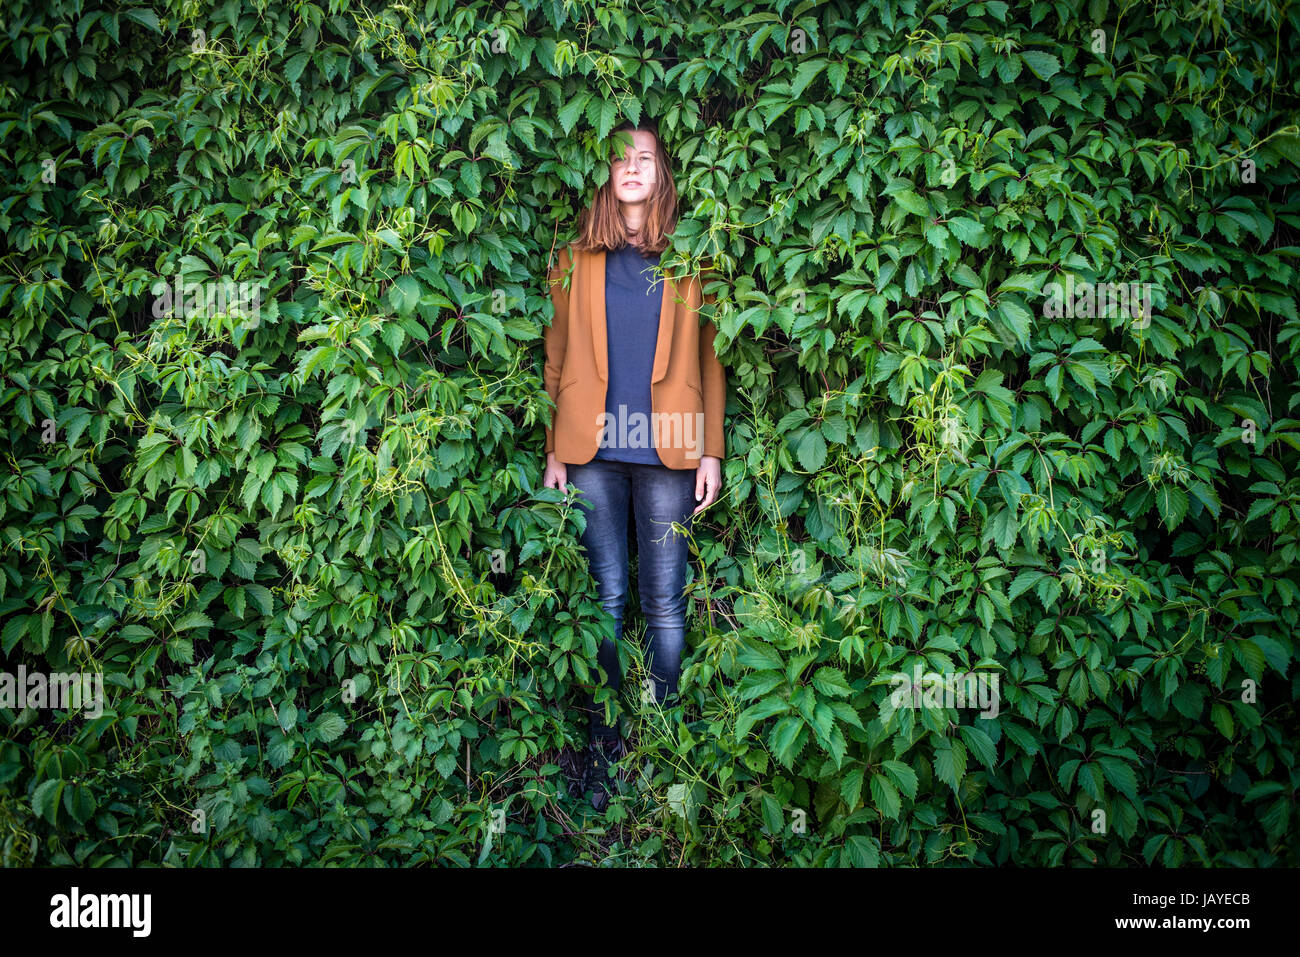 A young woman stands near a wall surrounded by greenery Stock Photo